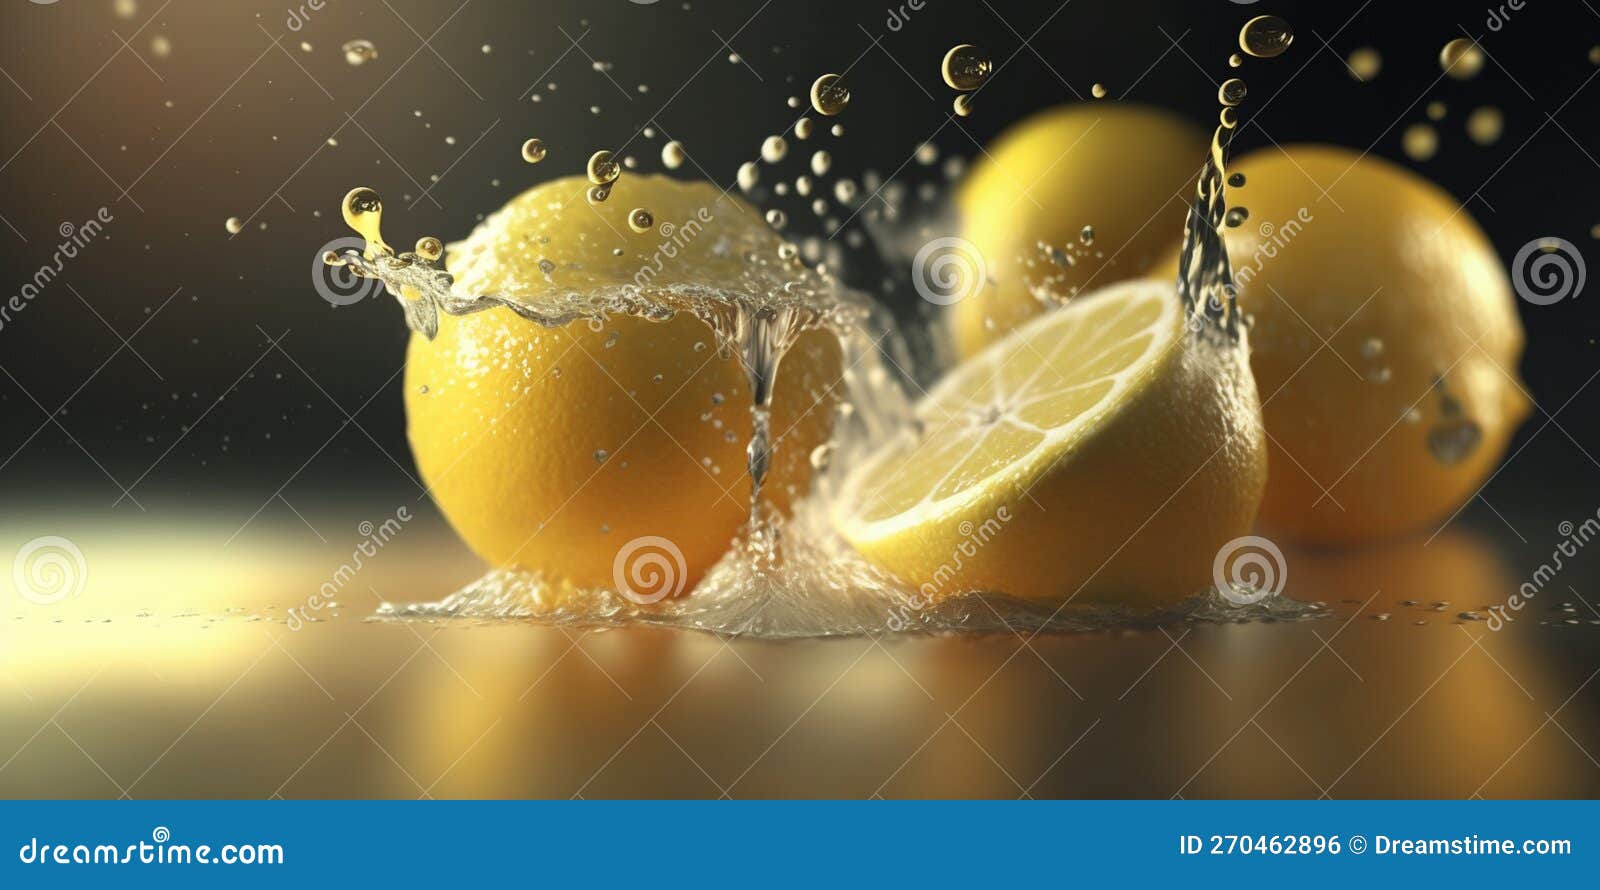 Lemons plunging into water: A splash of freshness. Watch lemons dive into crystal clear water,refreshing your senses instantly